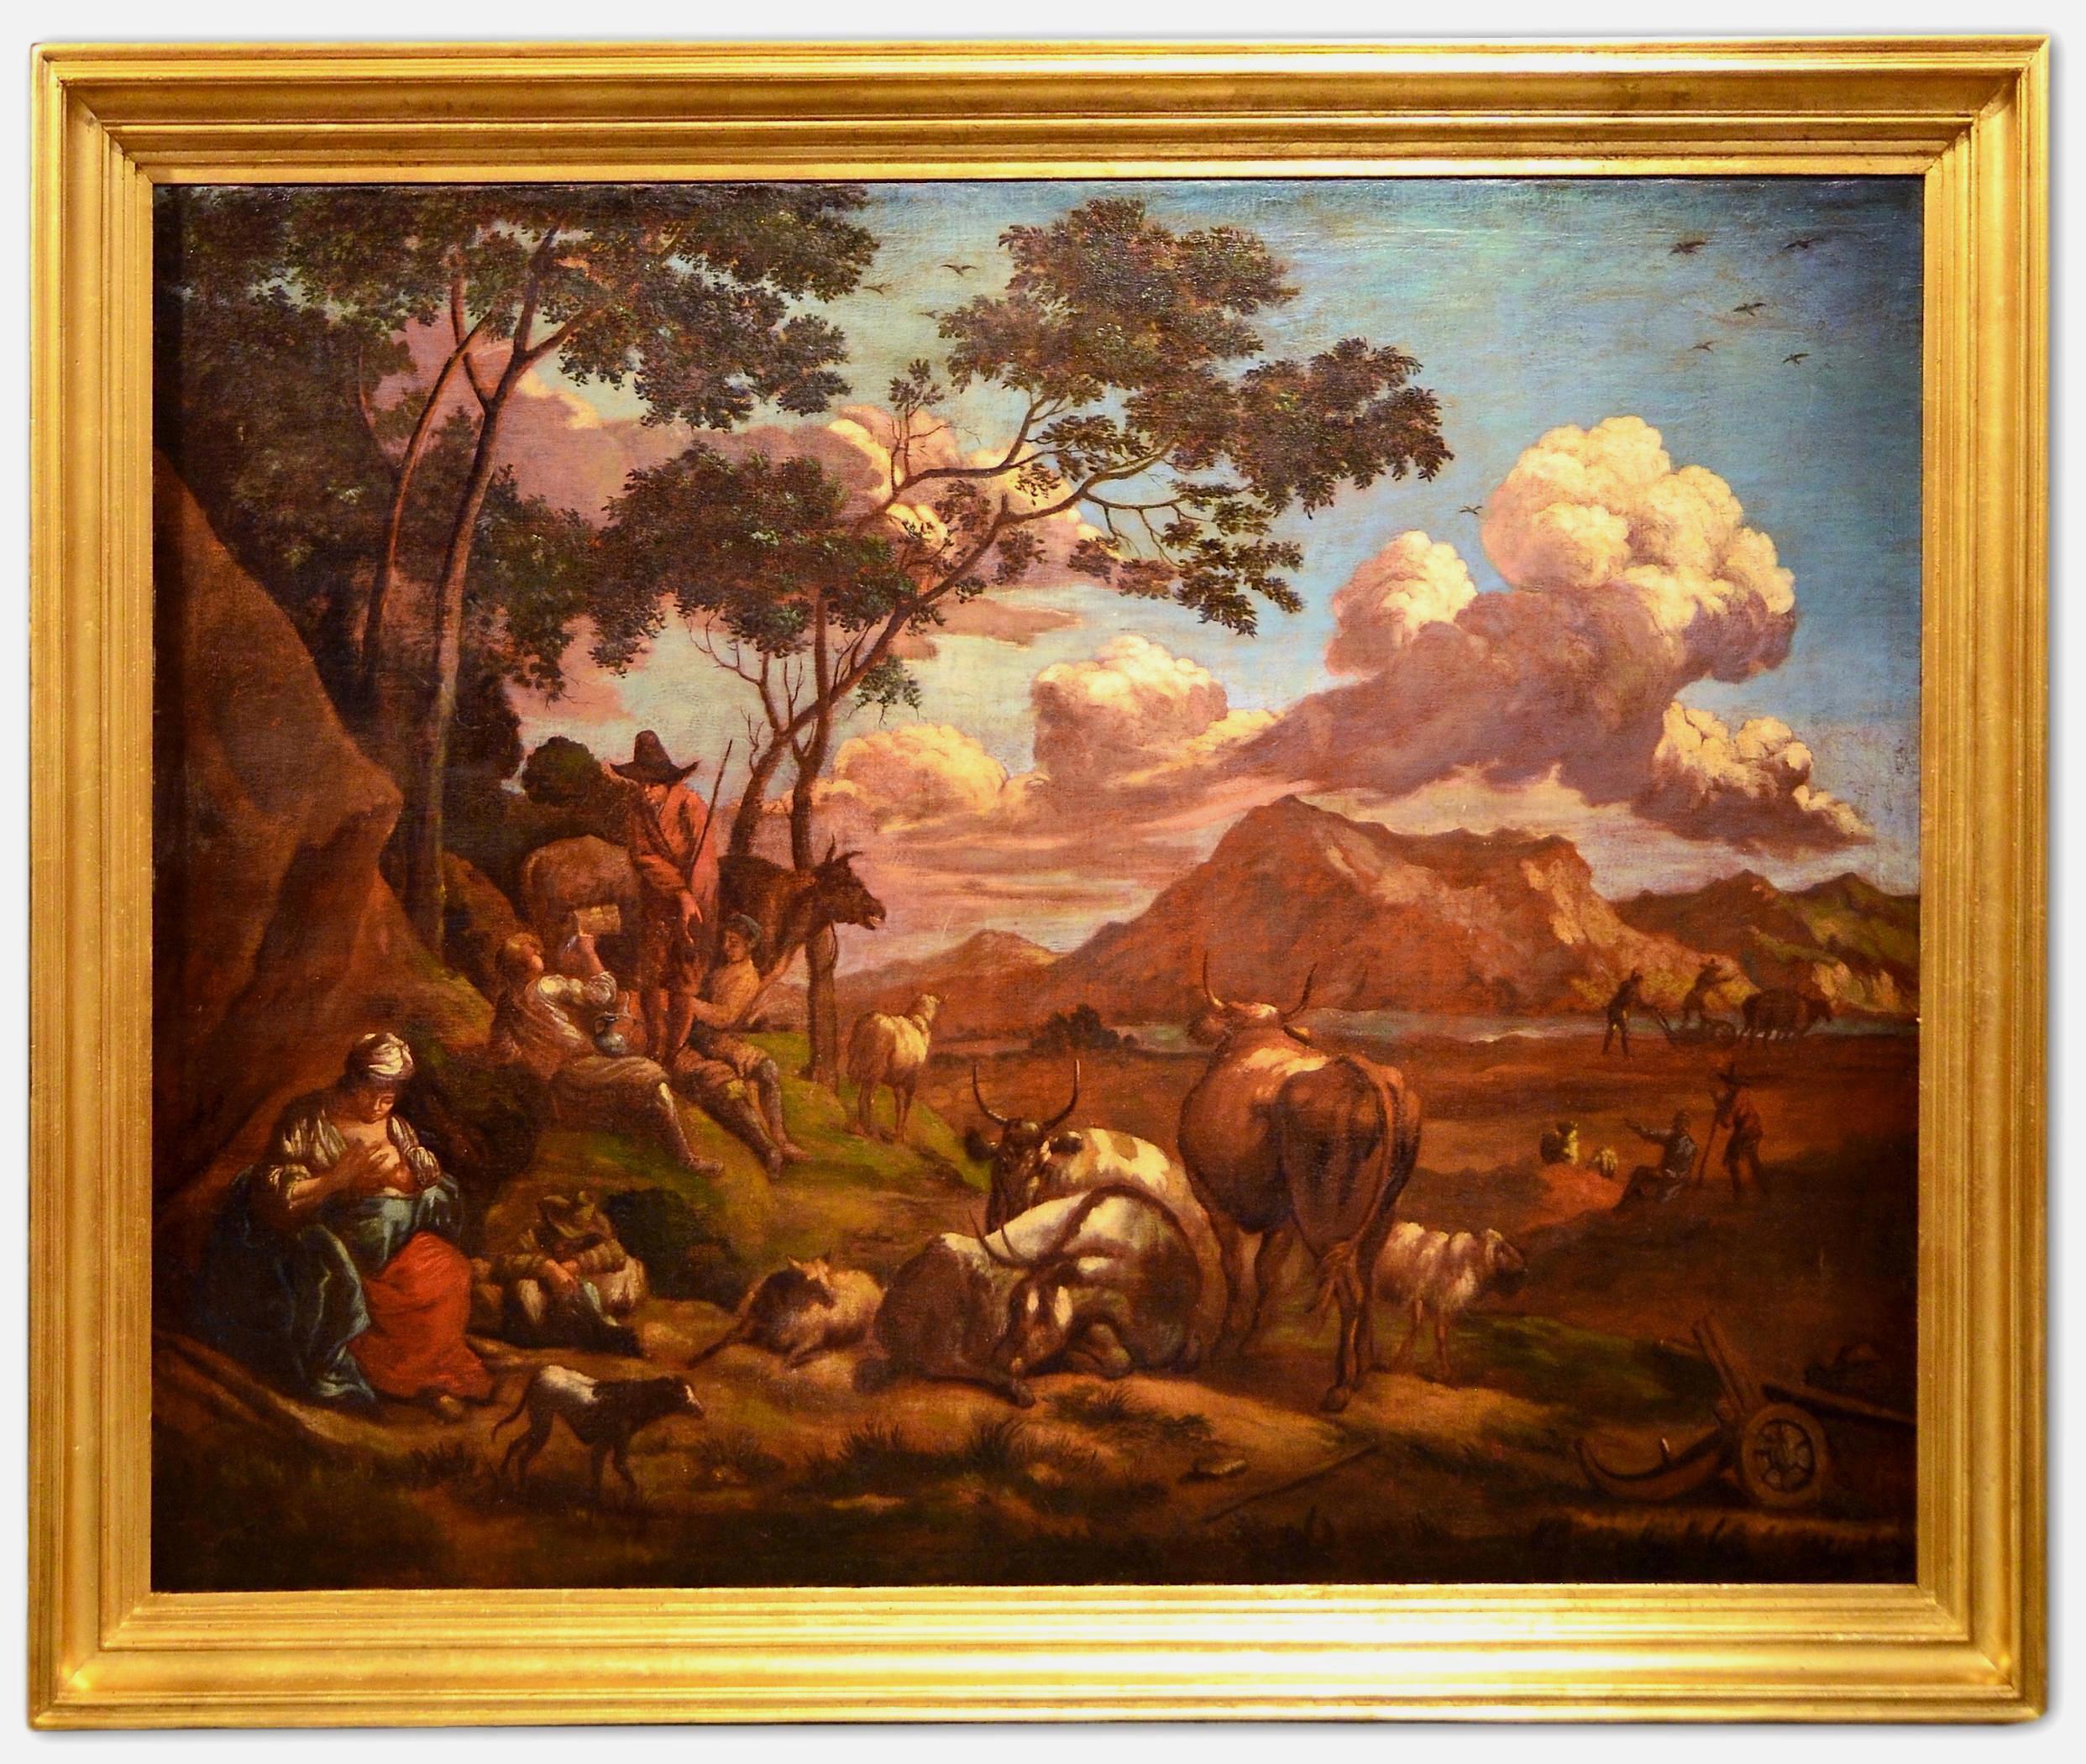 Landscape Italy Roma 17th Century Oil on canvas Paint Old master Quality Baroque - Painting by Nicolaes Berchem